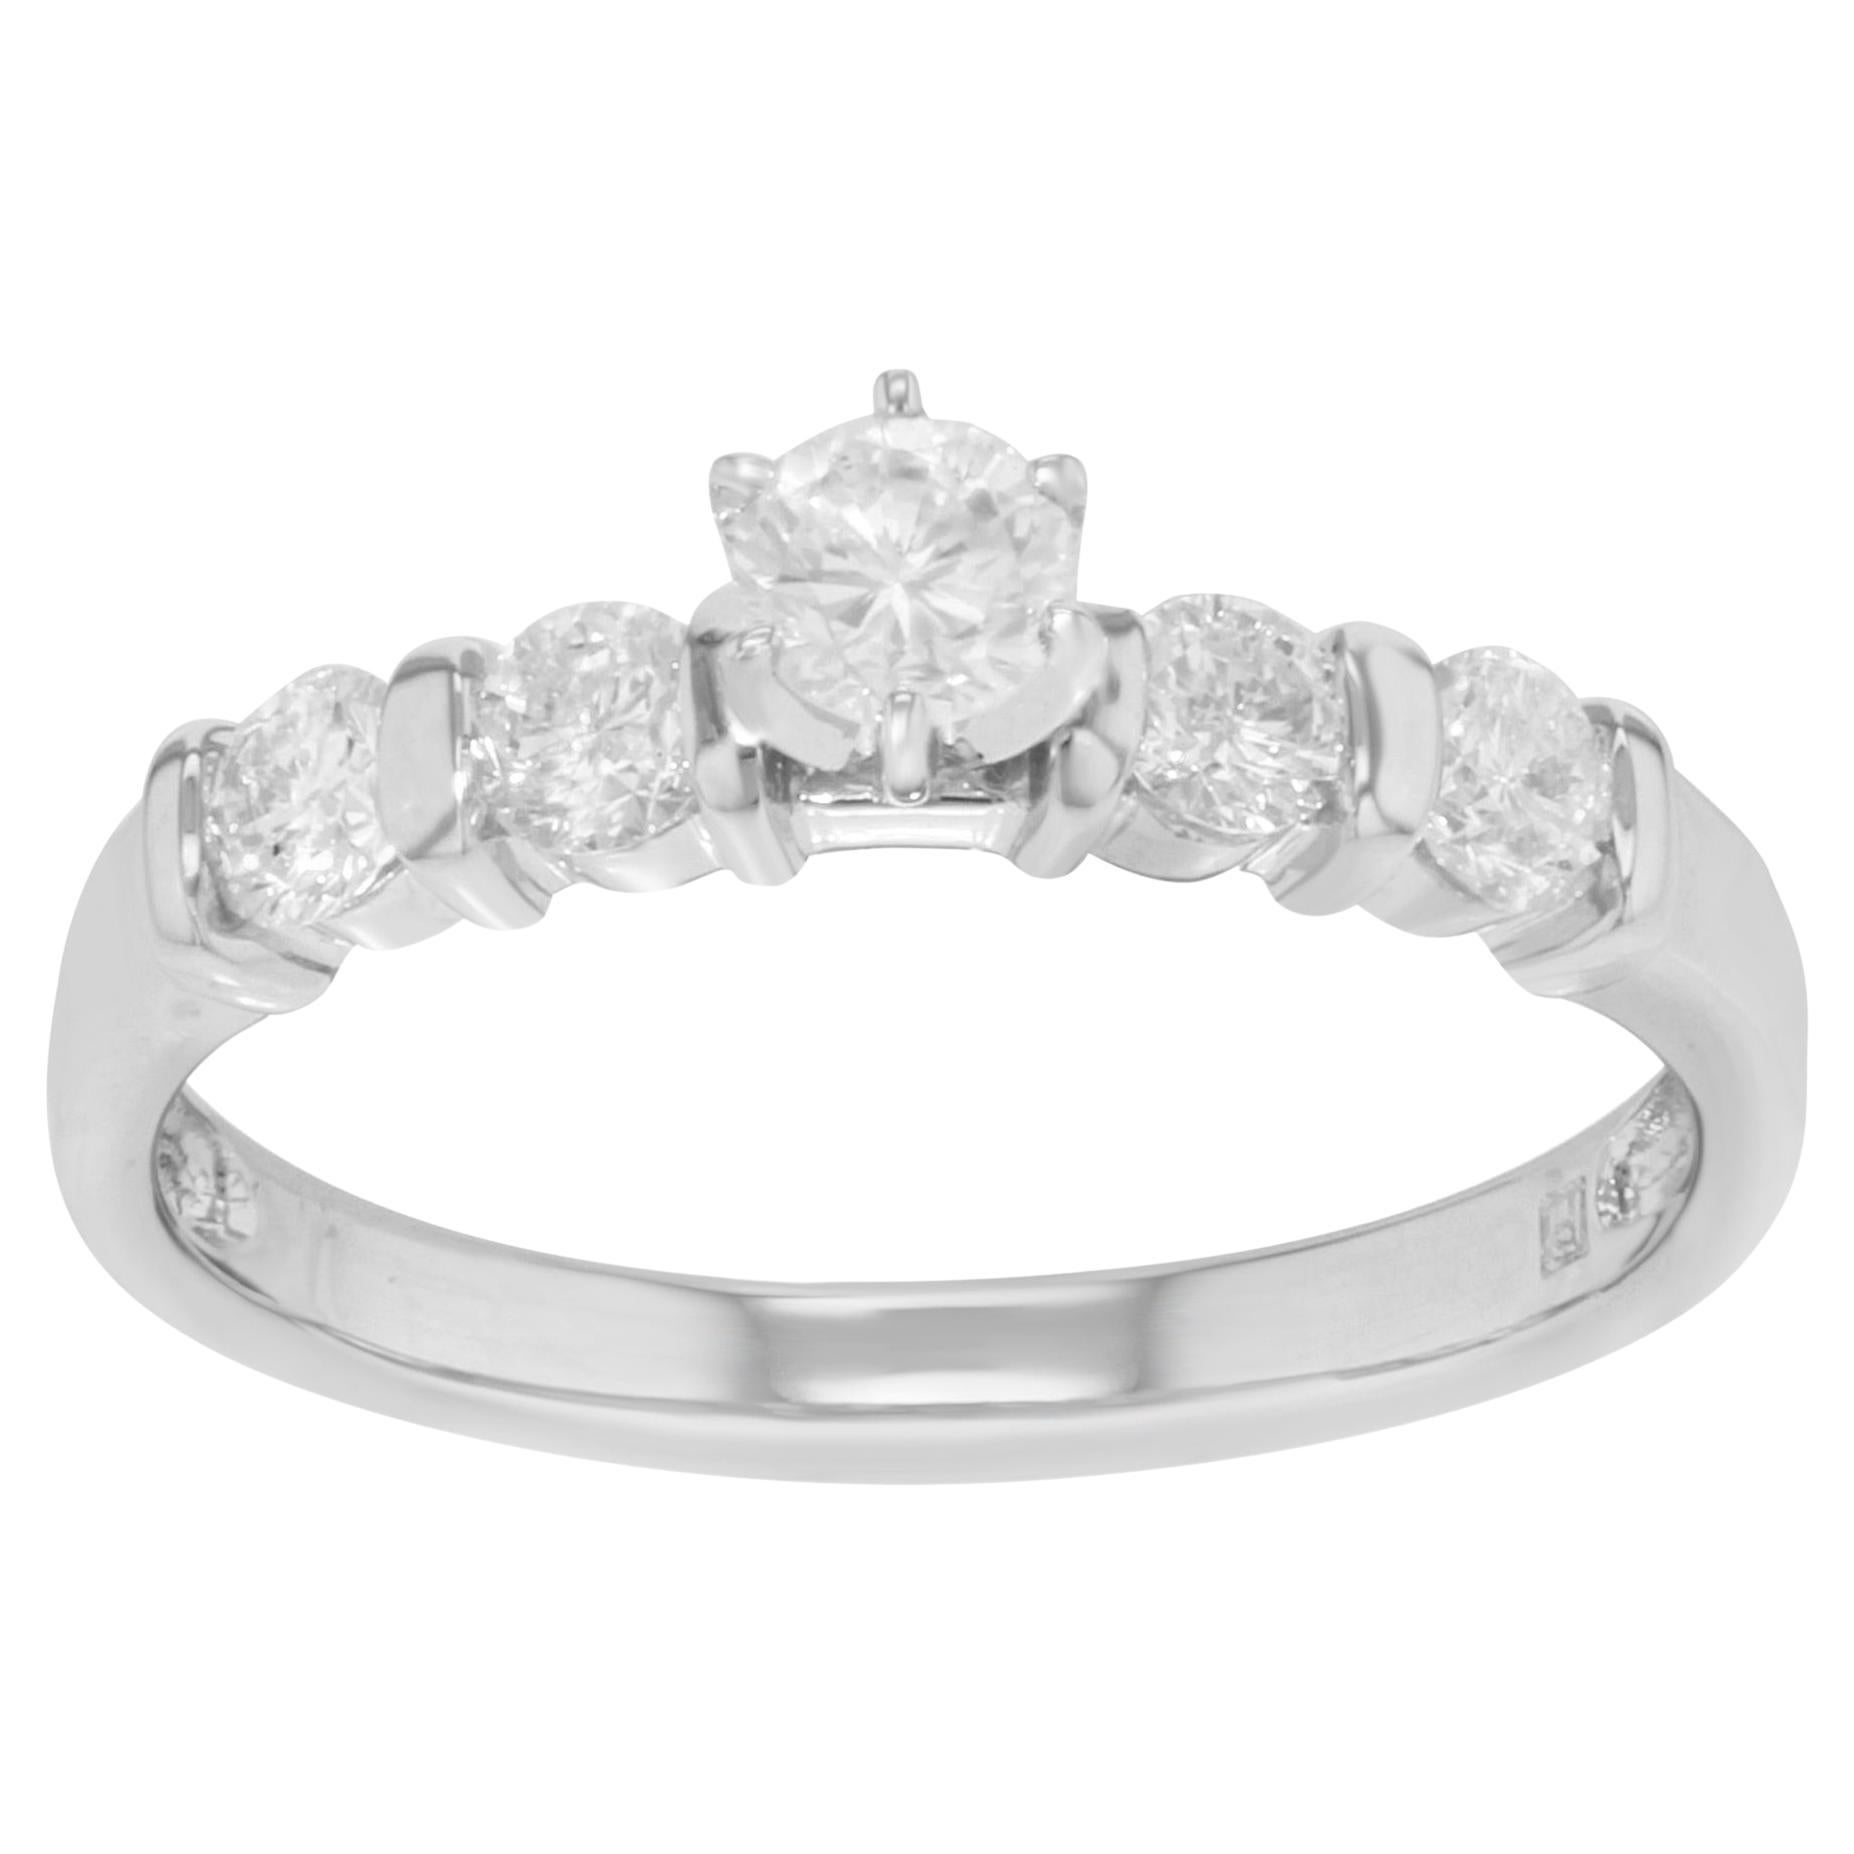 Diamond Accented Ladies Engagement Ring 14K White Gold 0.66 Cttw For Sale